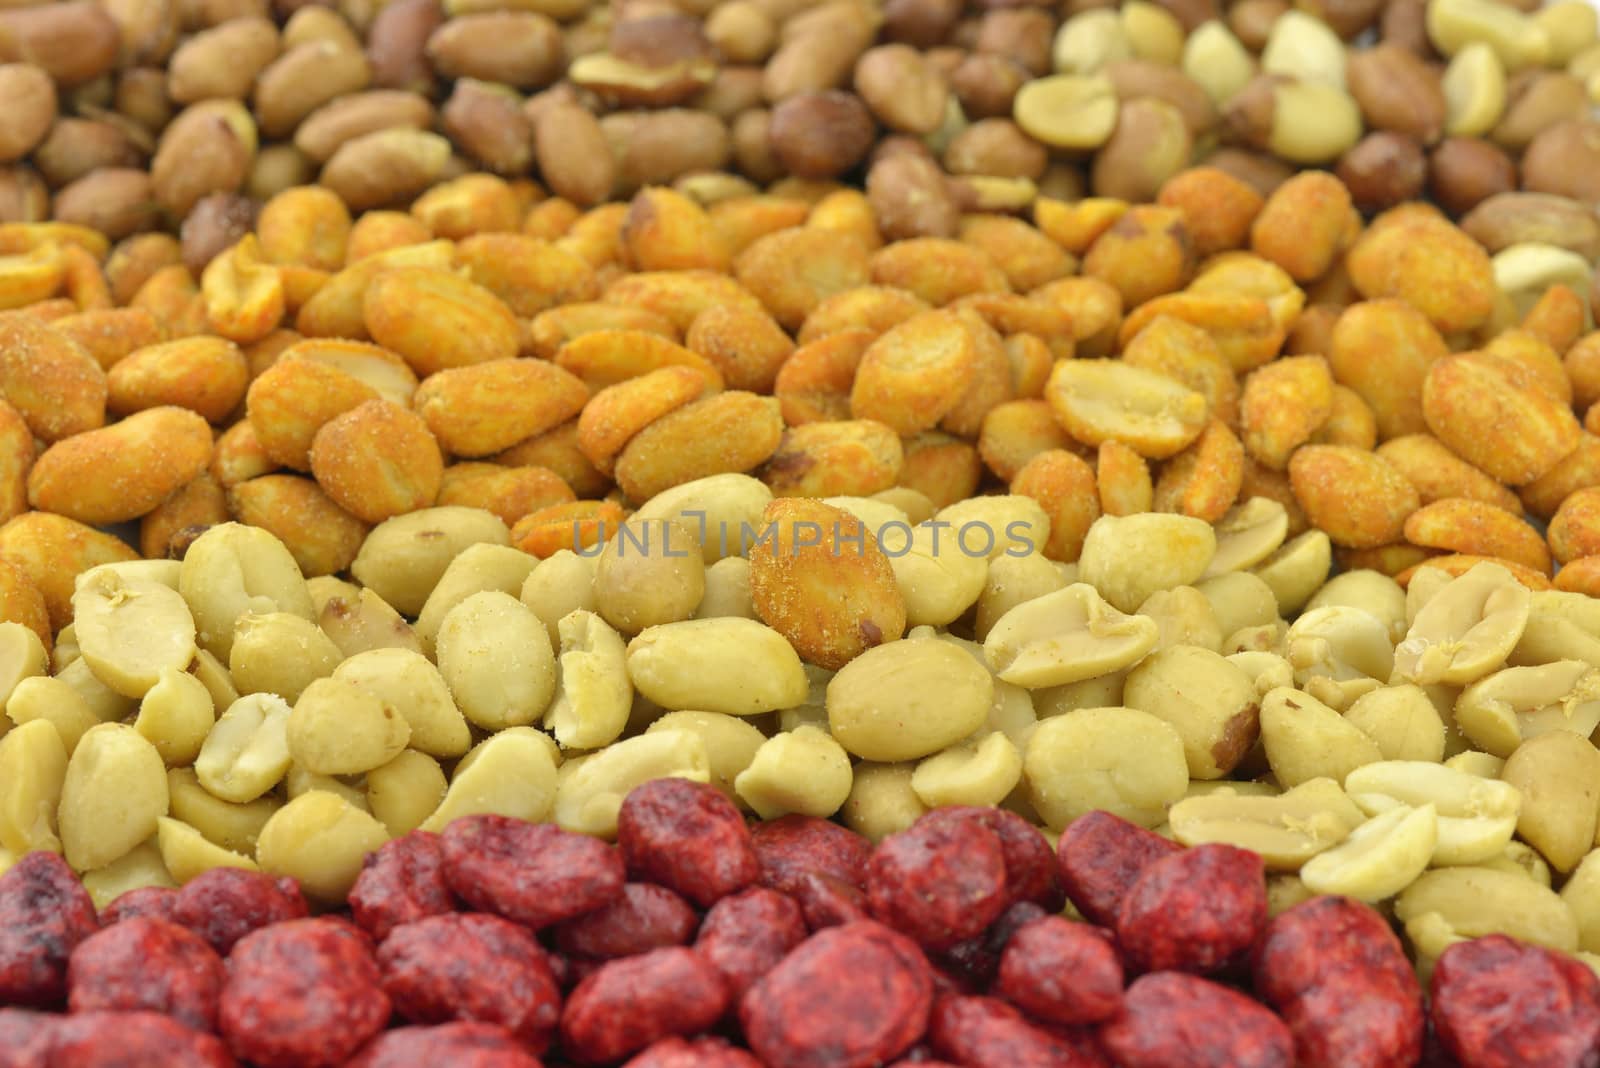 
Rows of different kinds of nuts